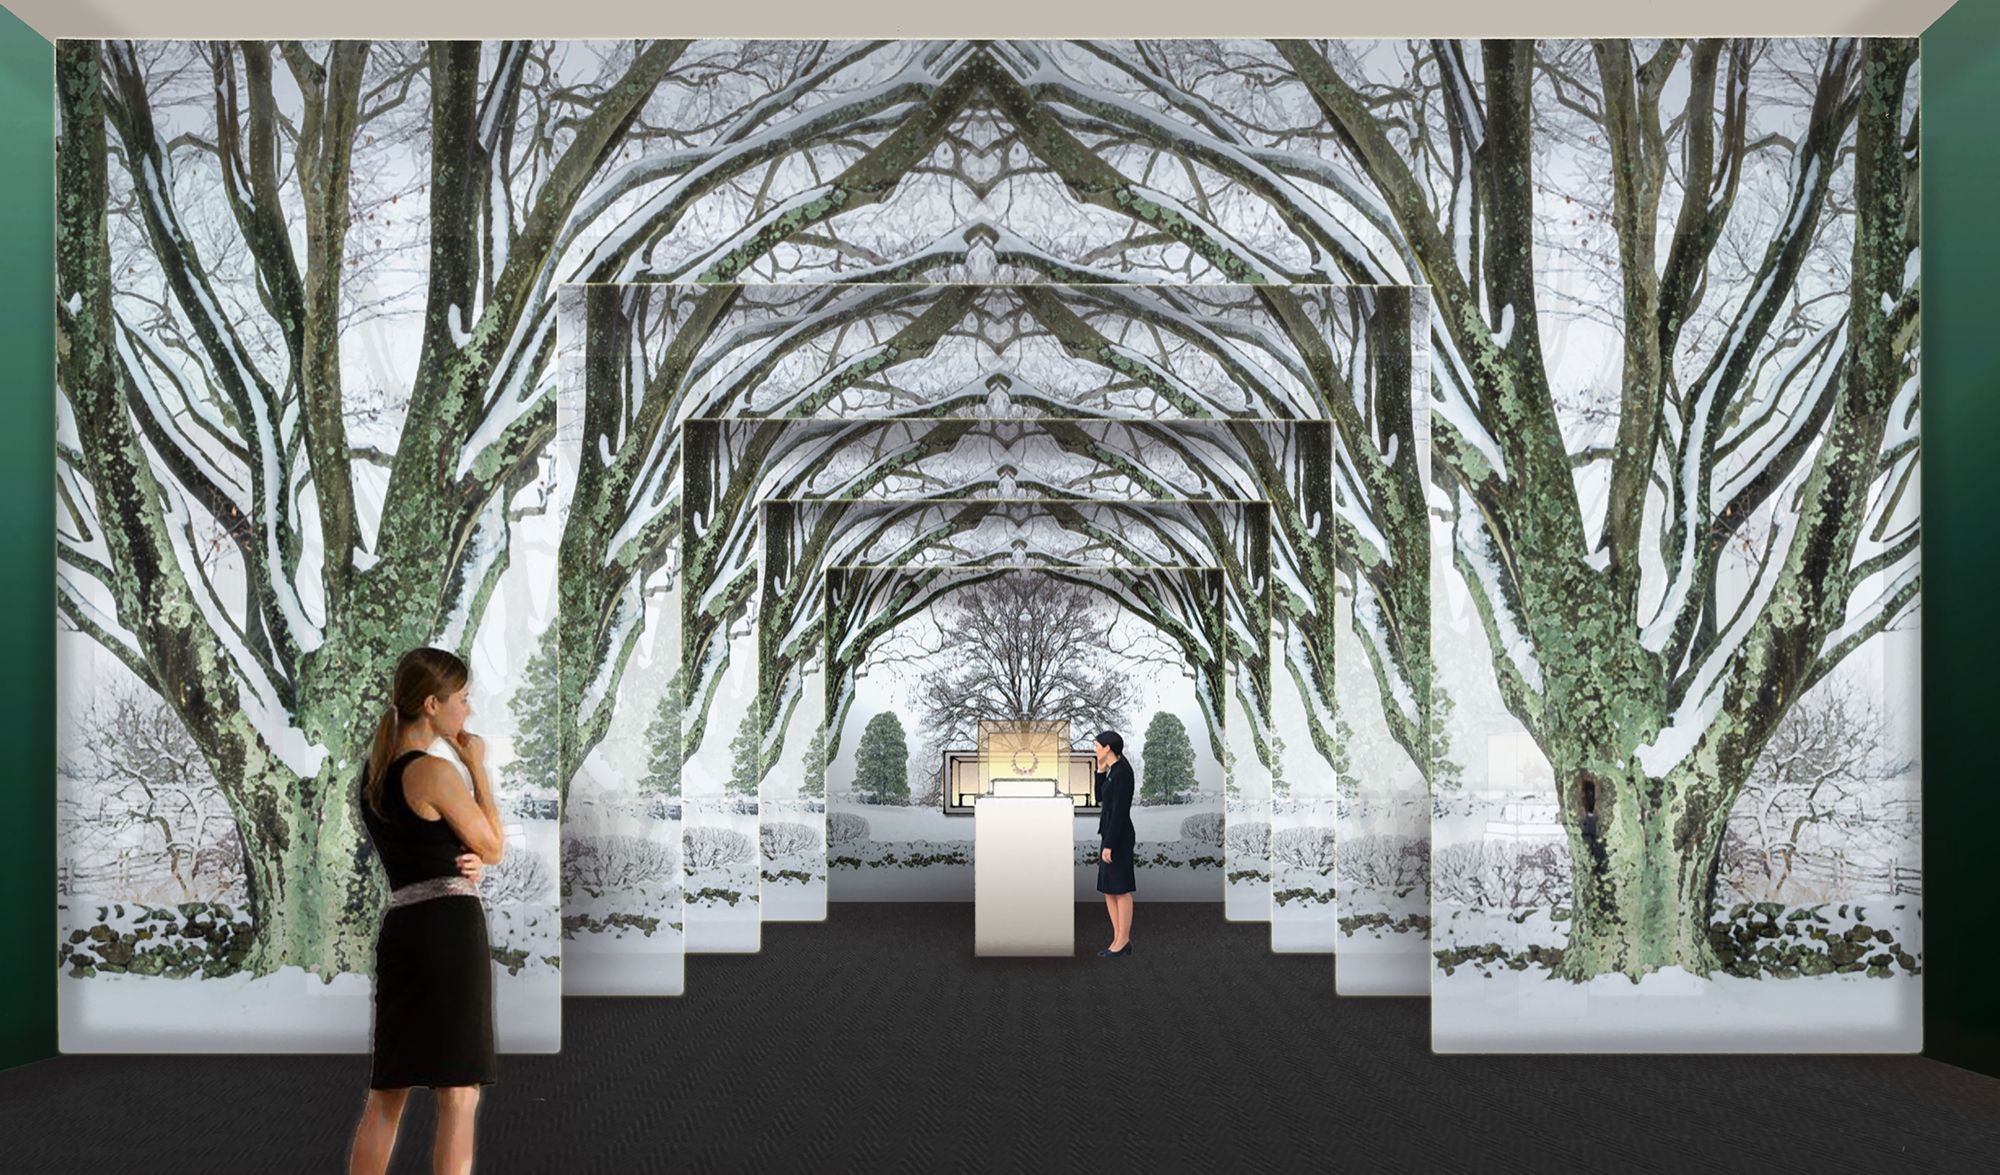 A WRJ Design rendering shows how Jenkins will use trompe l’oeil referencing Mrs. Mellon’s gardens as a dramatic corridor to Schlumberger jewelry displays for the “Jewels of the Imagination” exhibit.